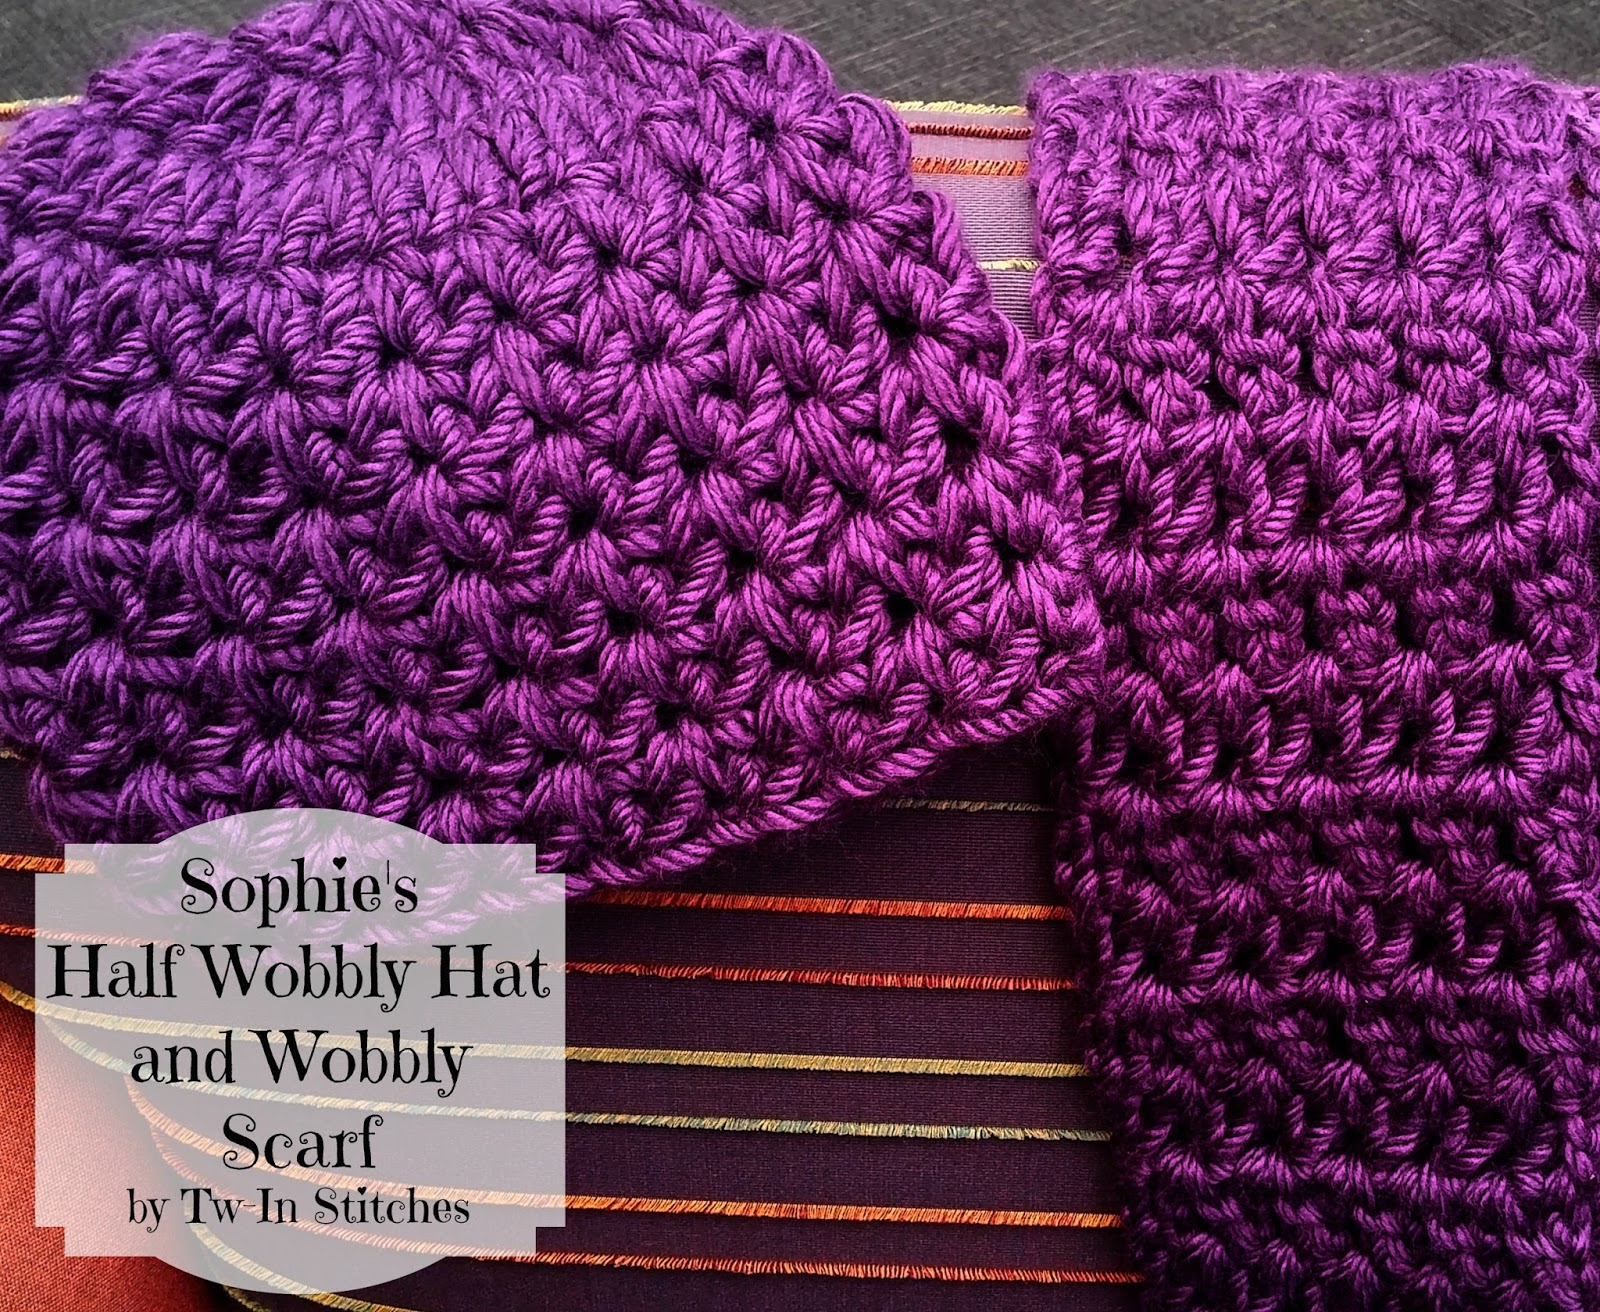 Super Bulky Yarn Crochet Scarf Pattern Tw In Stitches Sophies Half Wobbly Hat And Scarf Free Pattern